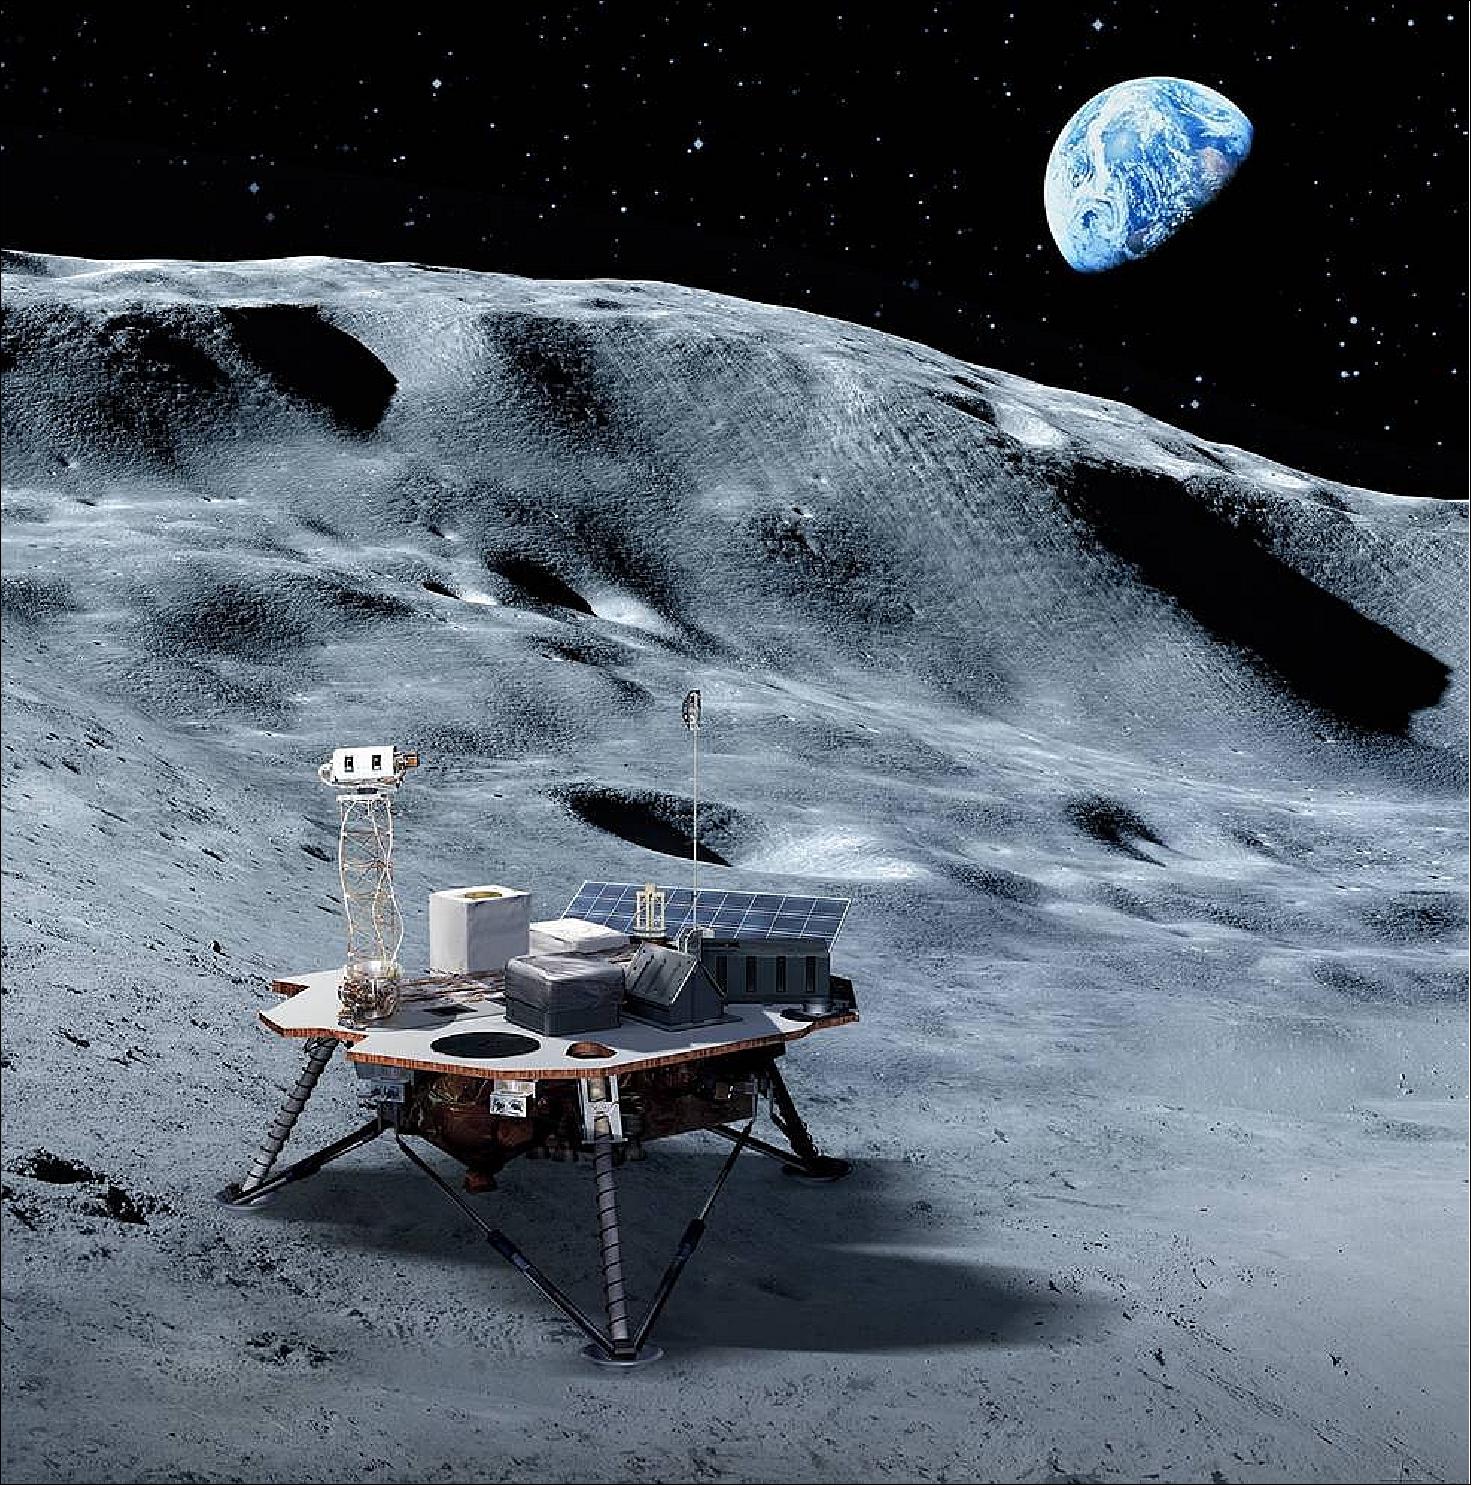 Figure 46: Commercial landers will carry NASA-provided science and technology payloads to the lunar surface, paving the way for NASA astronauts to land on the Moon by 2024 (image credit: NASA)